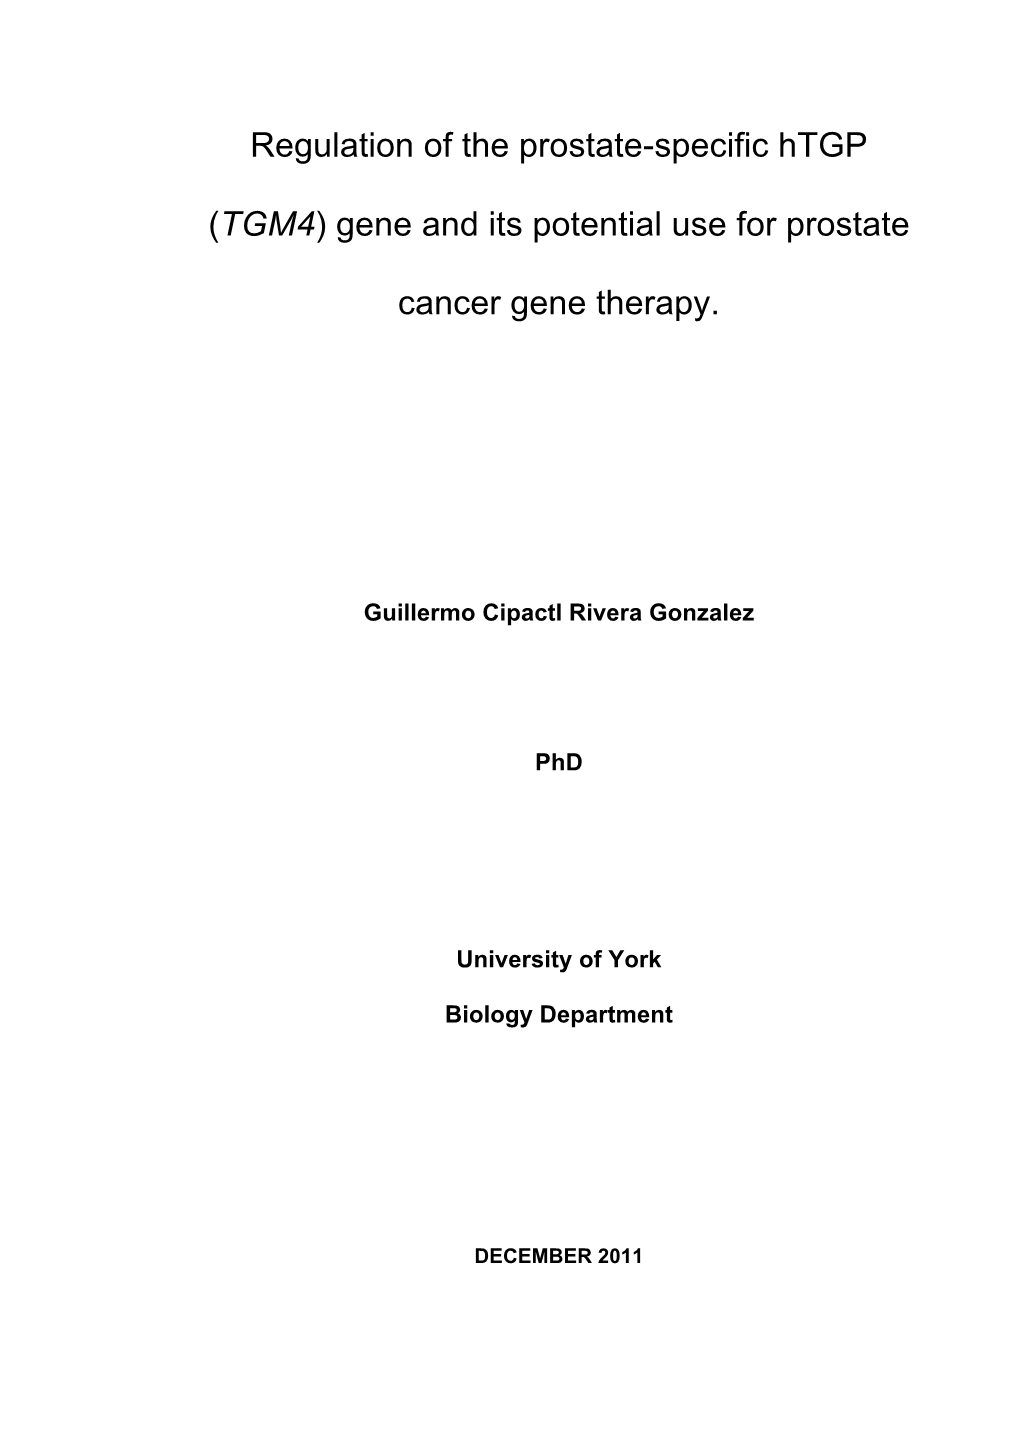 (TGM4) Gene and Its Potential Use for Prostate Cancer Gene Therapy